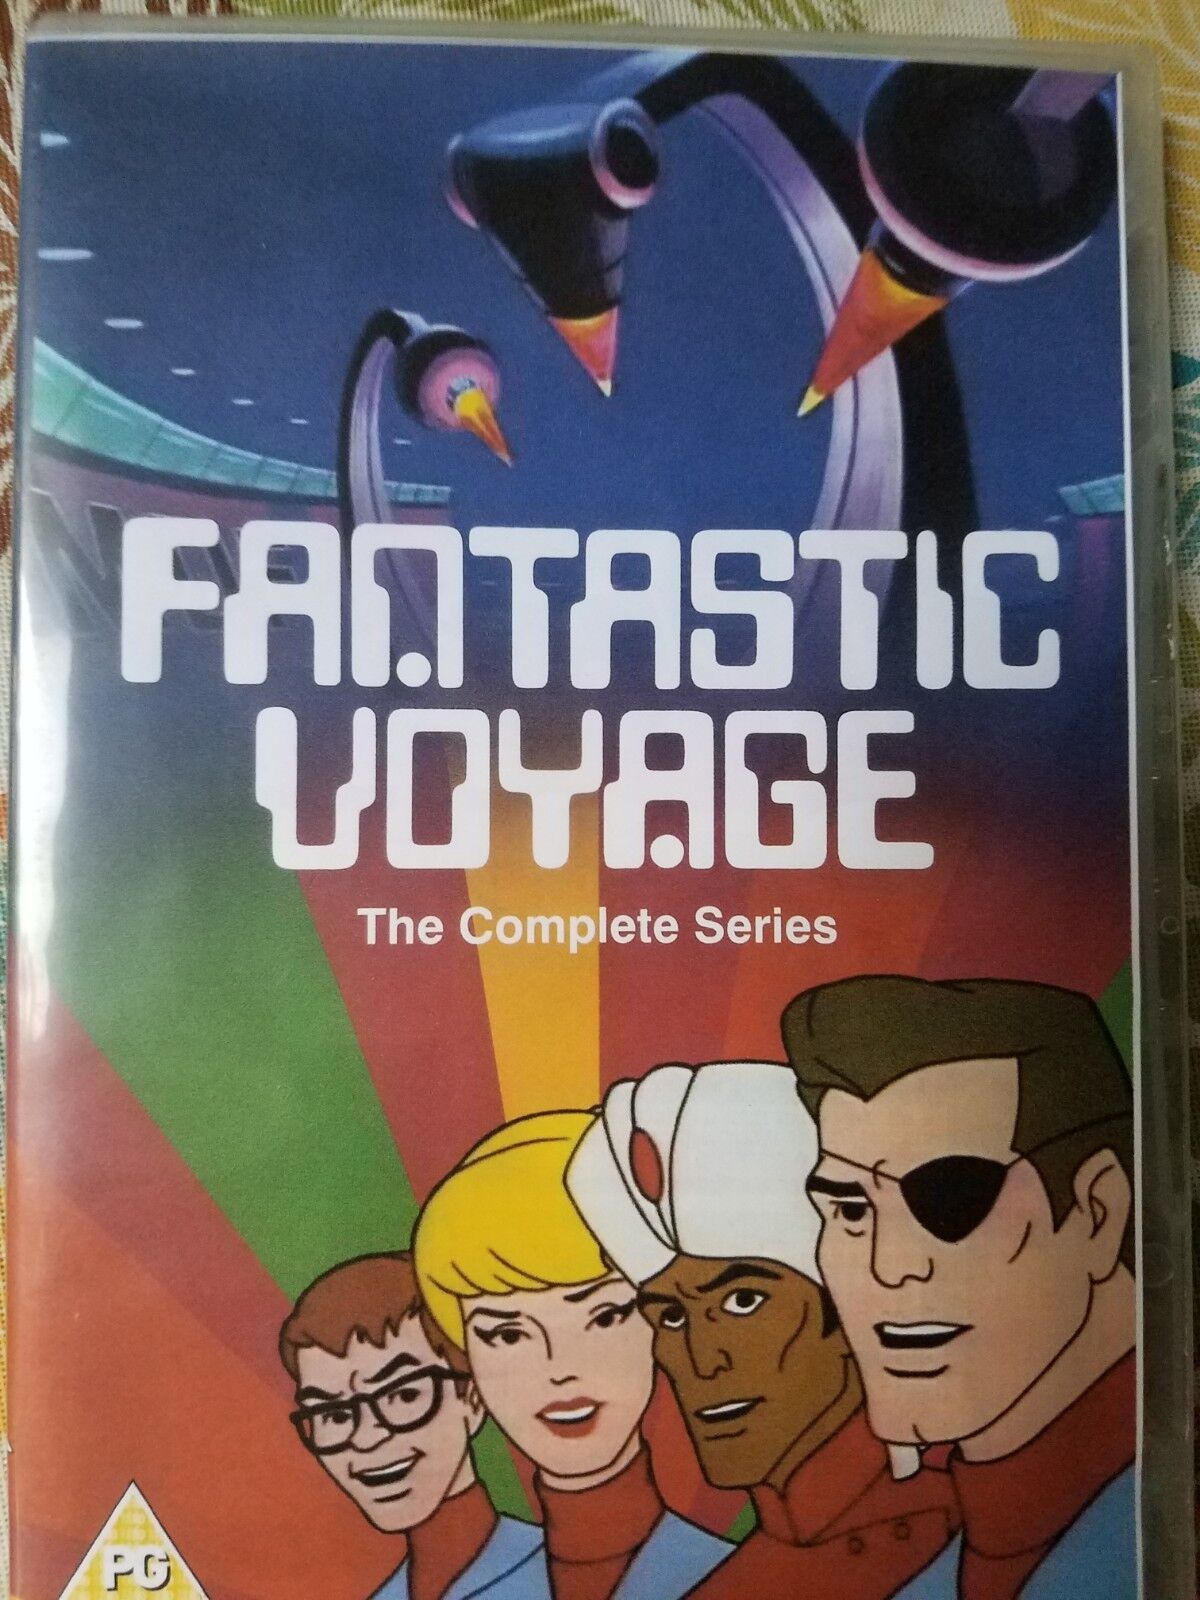 USA FANTASTIC VOYAGE CARTOON SERIES 1968 COMPLETE REGION 1 PLAYS IN THE USA 